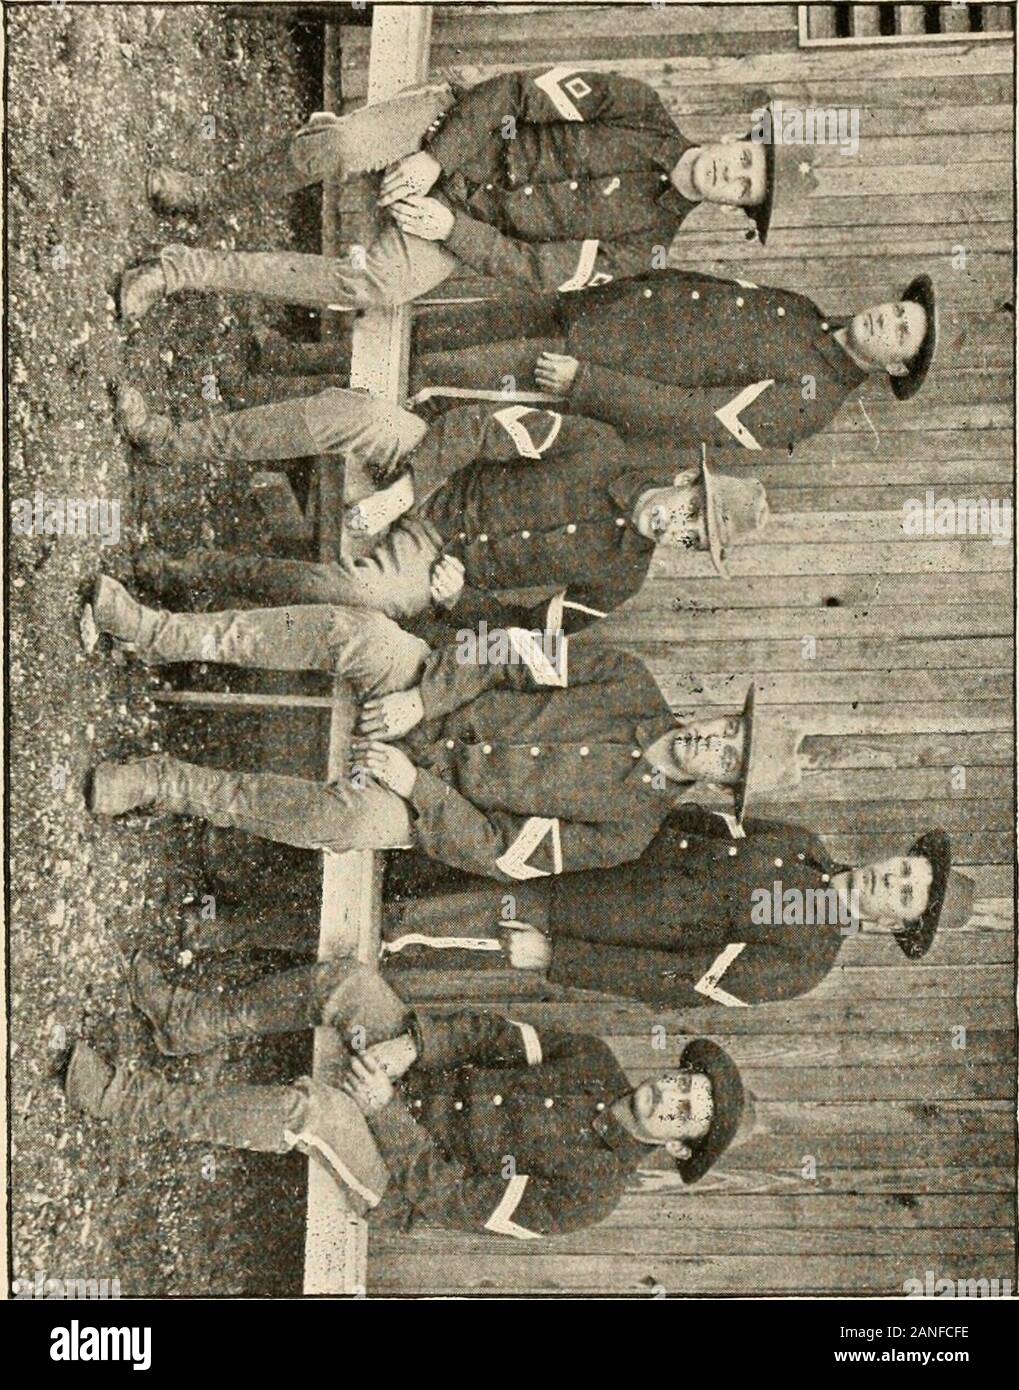 History of the One hundred and sixty-first regiment, Indiana volunteer infantry . s L. Dority, 2d Lieutenant, Michigan City, Ind. sergeants, Cissel, Ernest W., Laporte, Ind., Printer.Ansley, Robert, Westville, Ind., Medical Student.Southard, William E., Michigan City, Ind., Plasterer.Brown, Arthur R., Lebanon, Ind., Clerk.McDonald, Joseph, Michigan City, Ind., Laborer corporals. Ongman, Carl, Michigan City, Ind., Carpenter. Dilworth. Leslie. Michigan City, Ind., Laborer. Kinnel, Howard M., Michigan City, Ind.. Mechanic. Dodds, William L., Zelina, Ind., Railroad employe. fackson, Henry B., Lapo Stock Photo